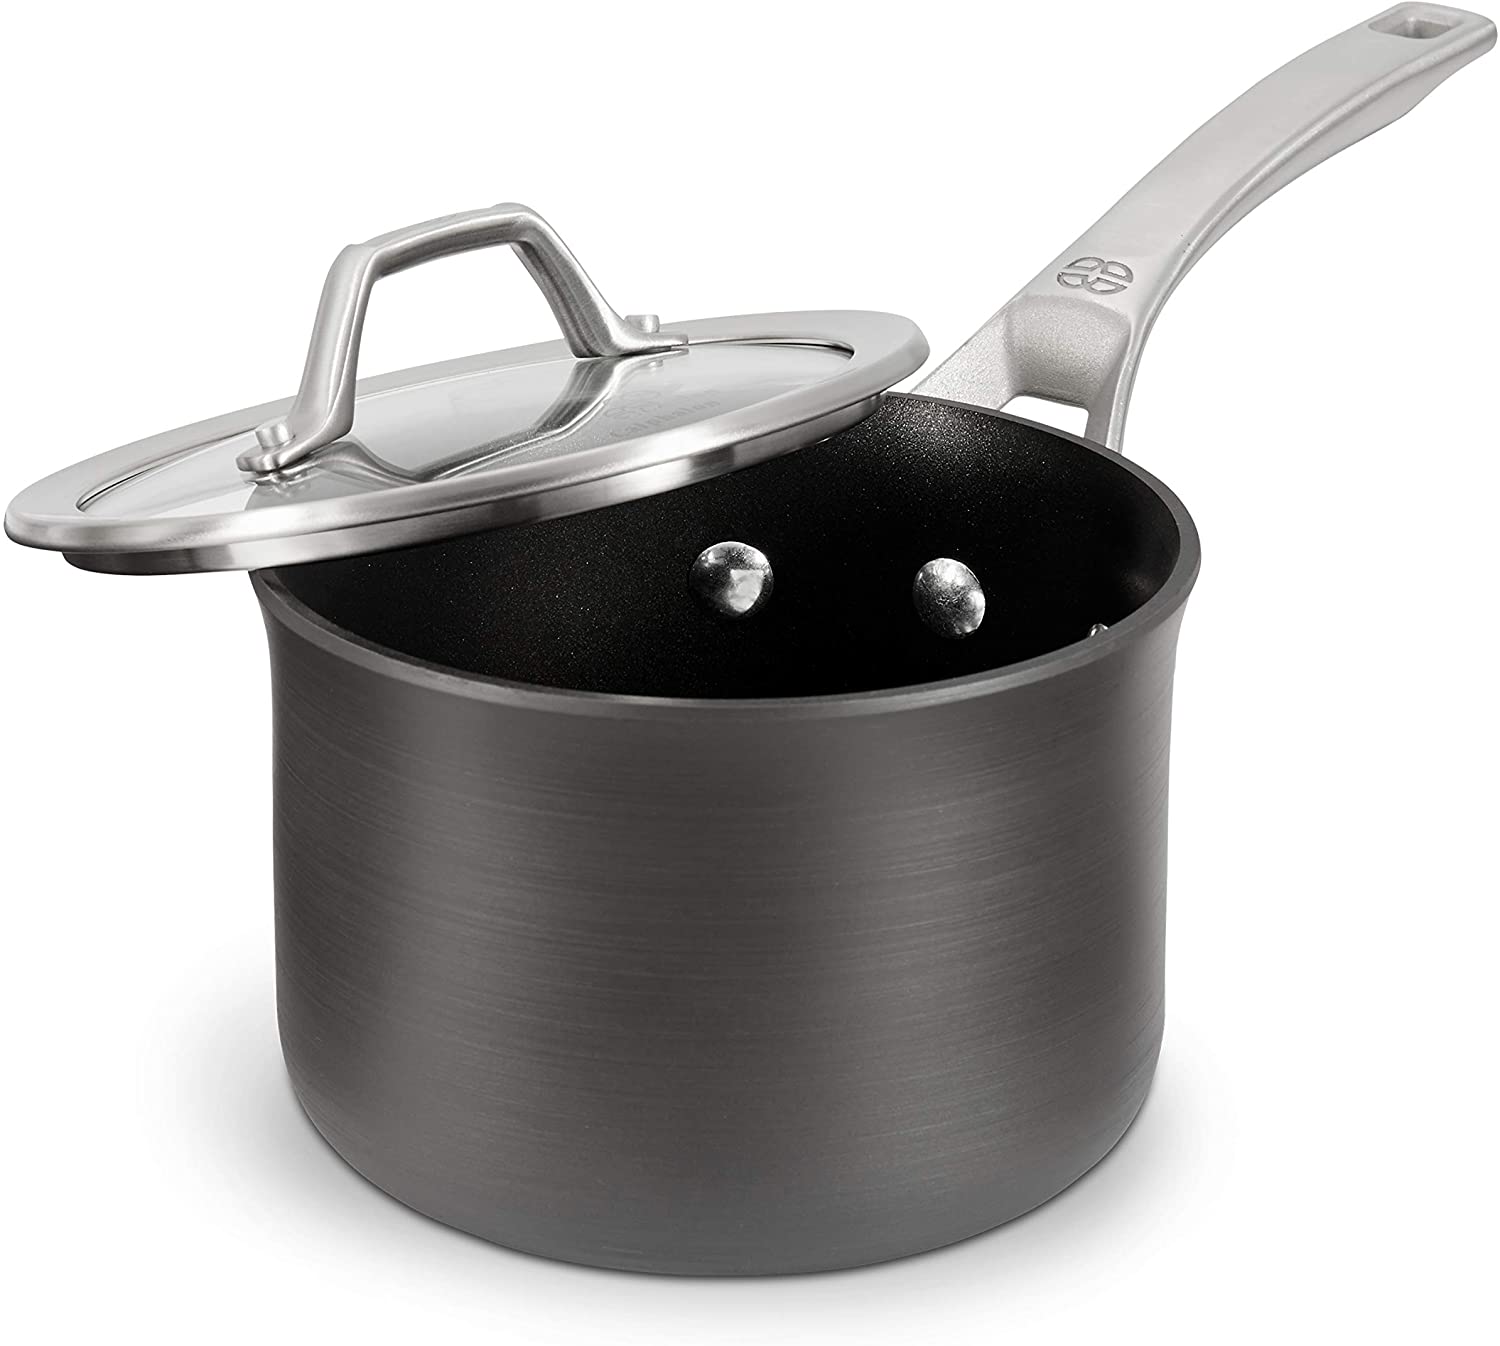 Calphalon Signature Hard-Anodized Nonstick 2-Quart Sauce Pan with Cove -  The Luxury Home Store